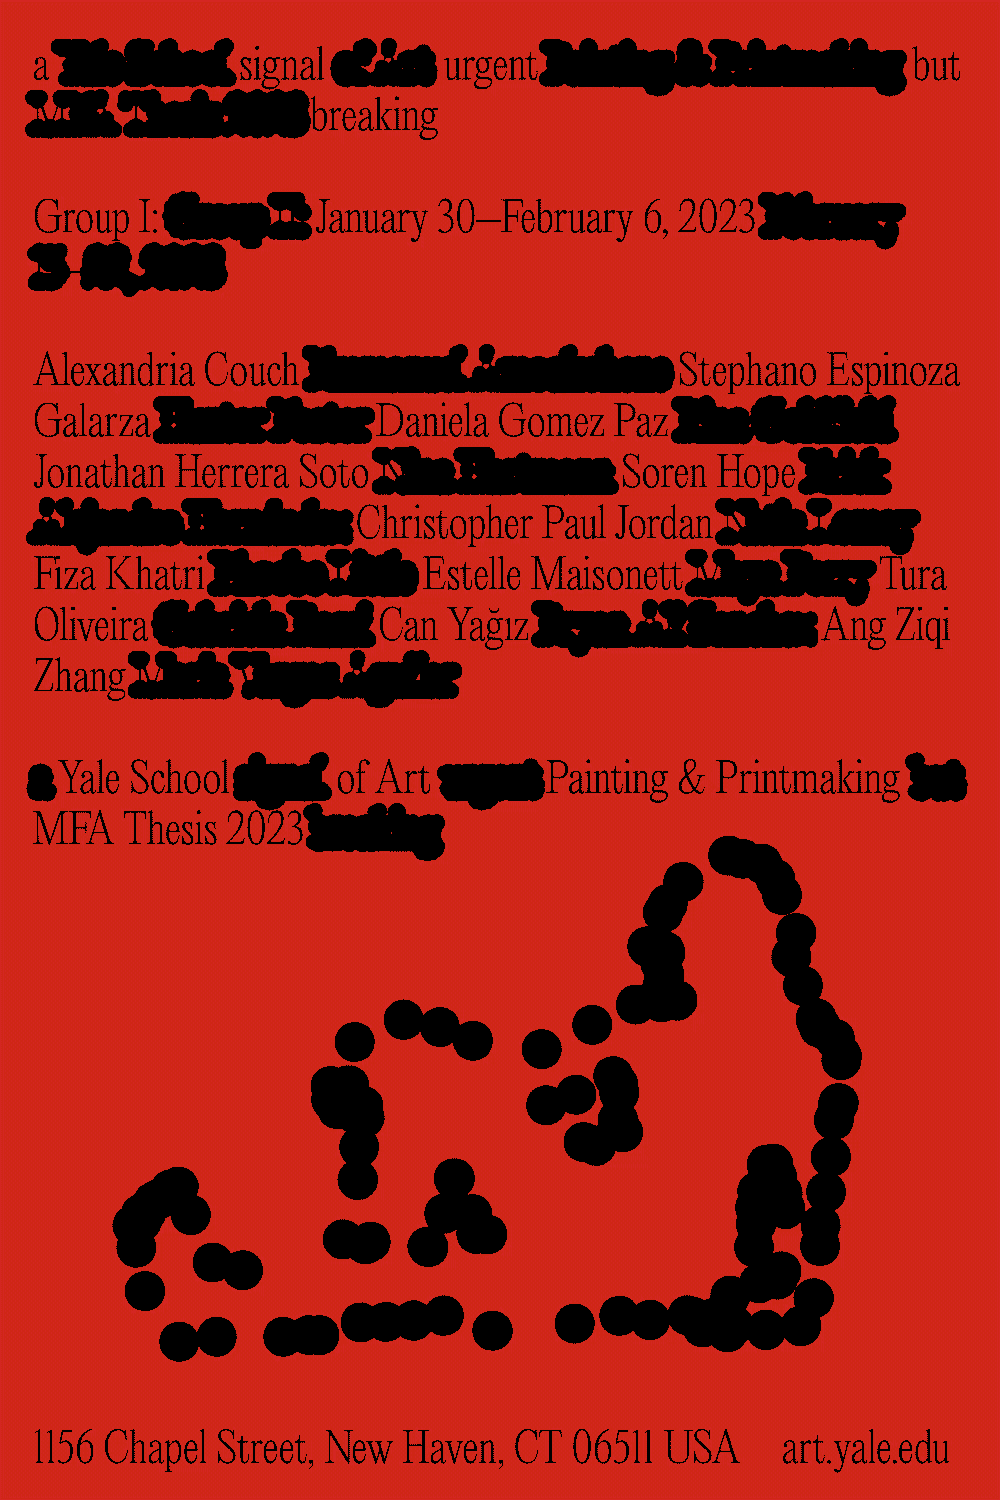 Poster for 2023 MFA thesis exhibitions in Painting/Printmaking, "a signal urgent but breaking"